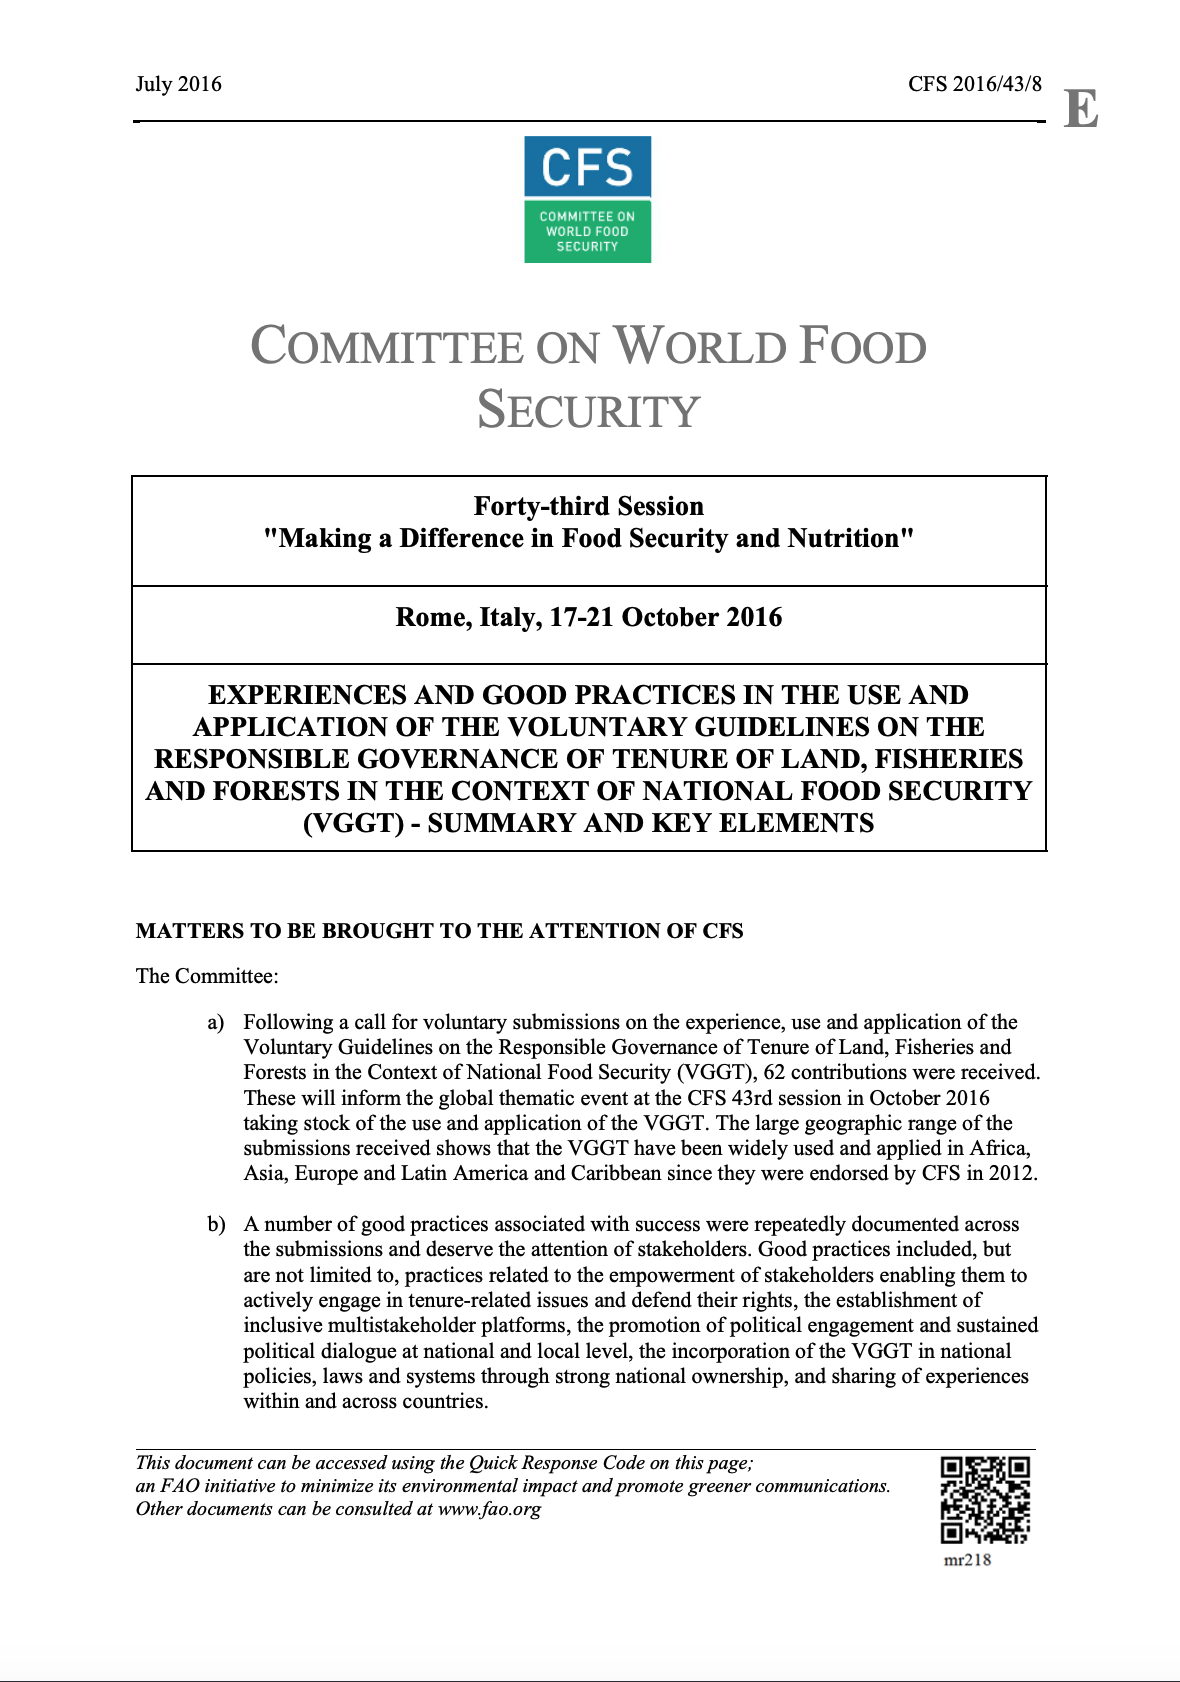 Experiences and Good Practices In The Use and Application of The Voluntary Guidelines on the Responsible Governance of Tenure of Land, Fisheries and Forests in the Context of National Food Security (VGGT) - Summary and Key Elements cover image